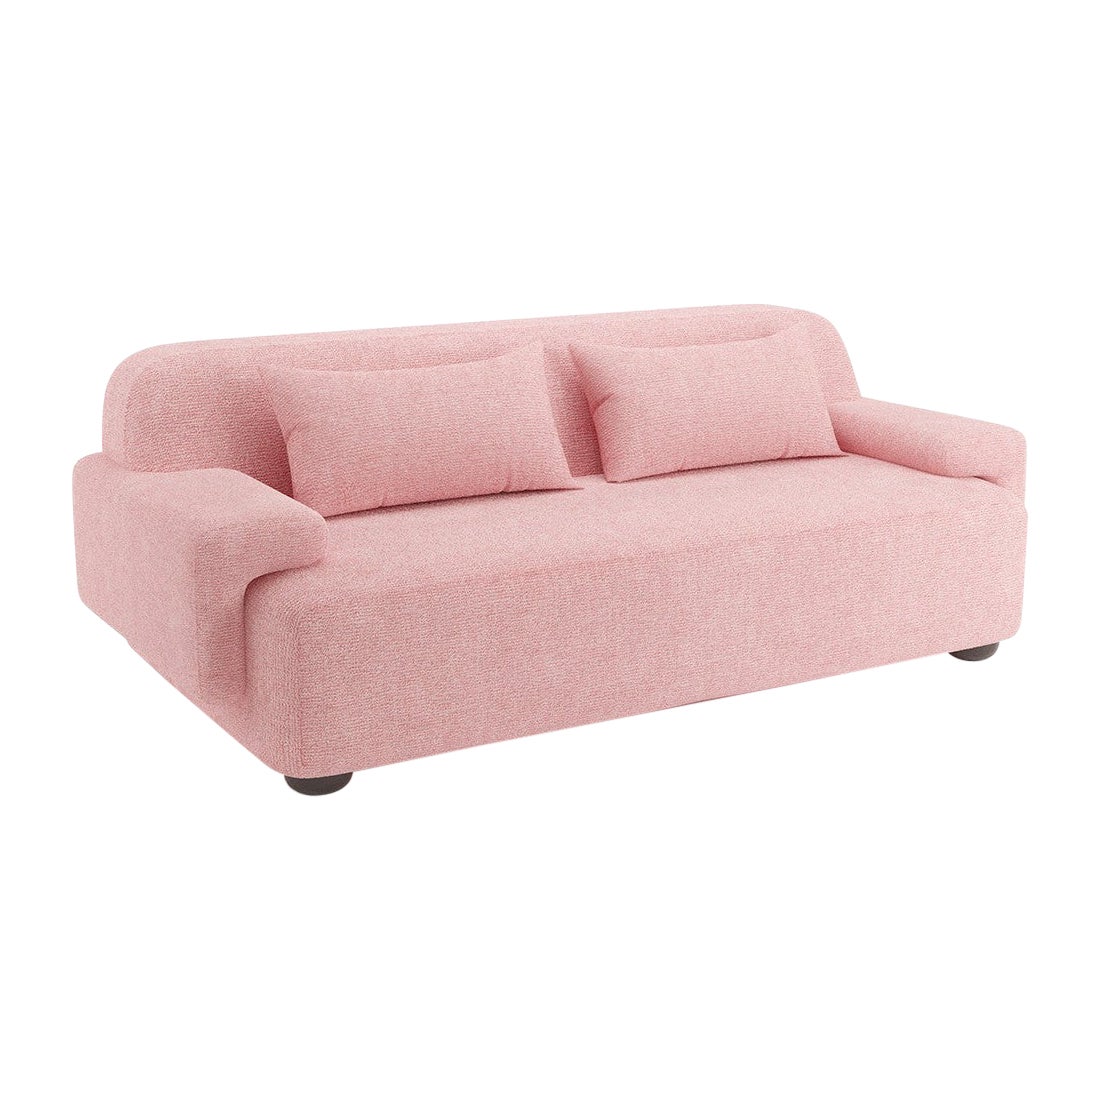 Popus Editions Lena 3 Seater Sofa in Pink Megeve Fabric with Knit Effect For Sale